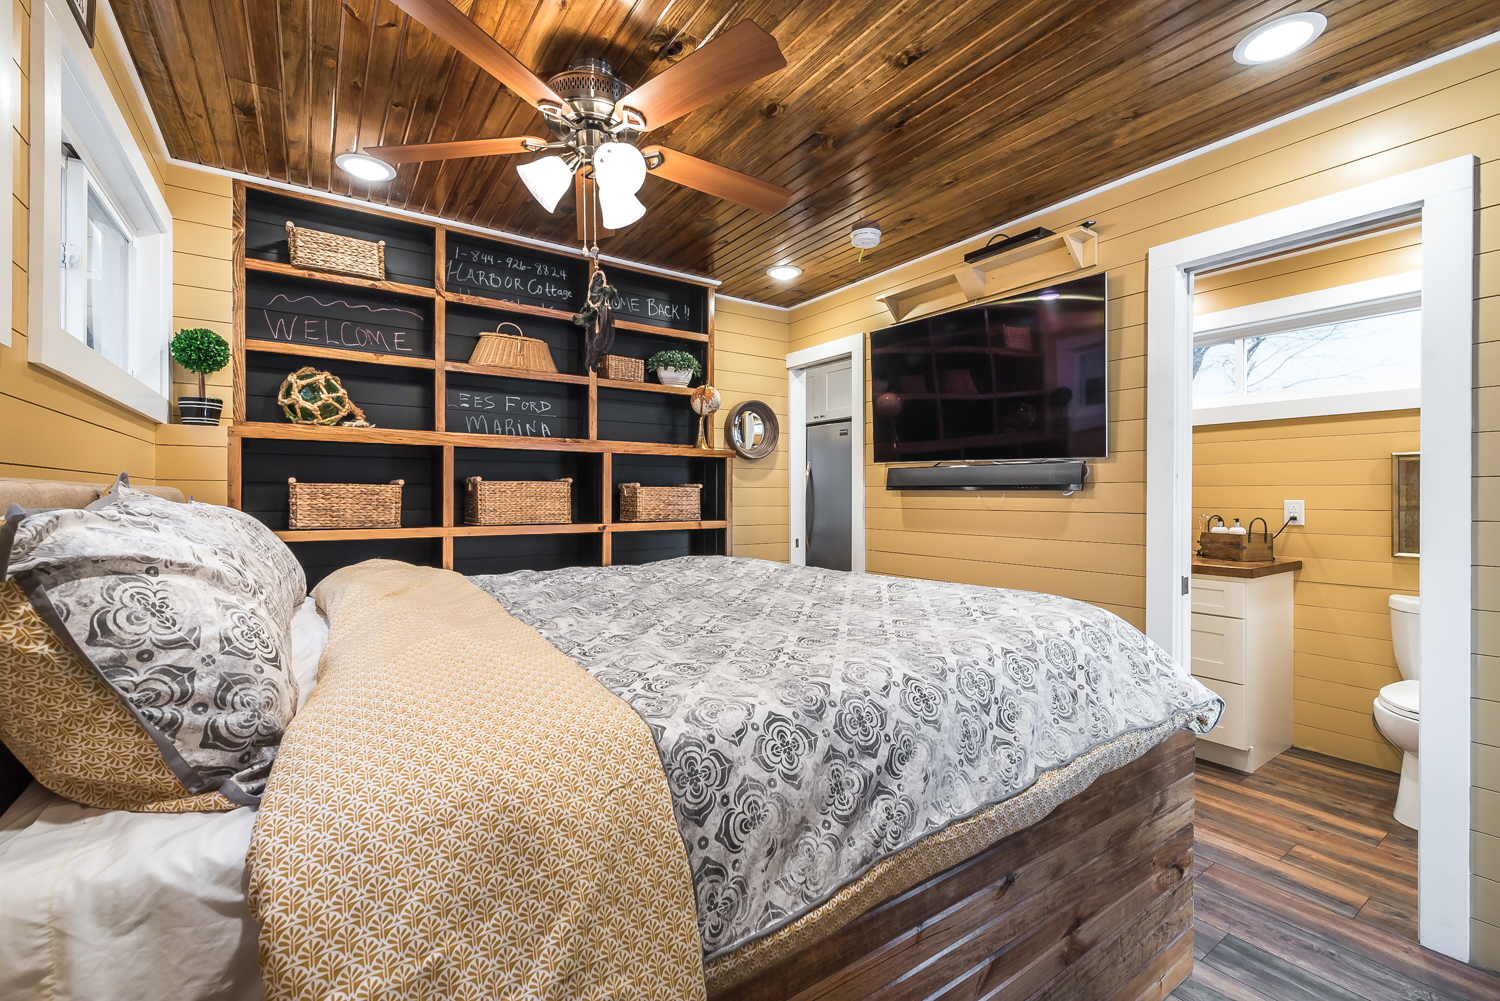 Bed in a wood-paneled bedroom with a wooden modular shelf that has woven artifacts on the shelf tops